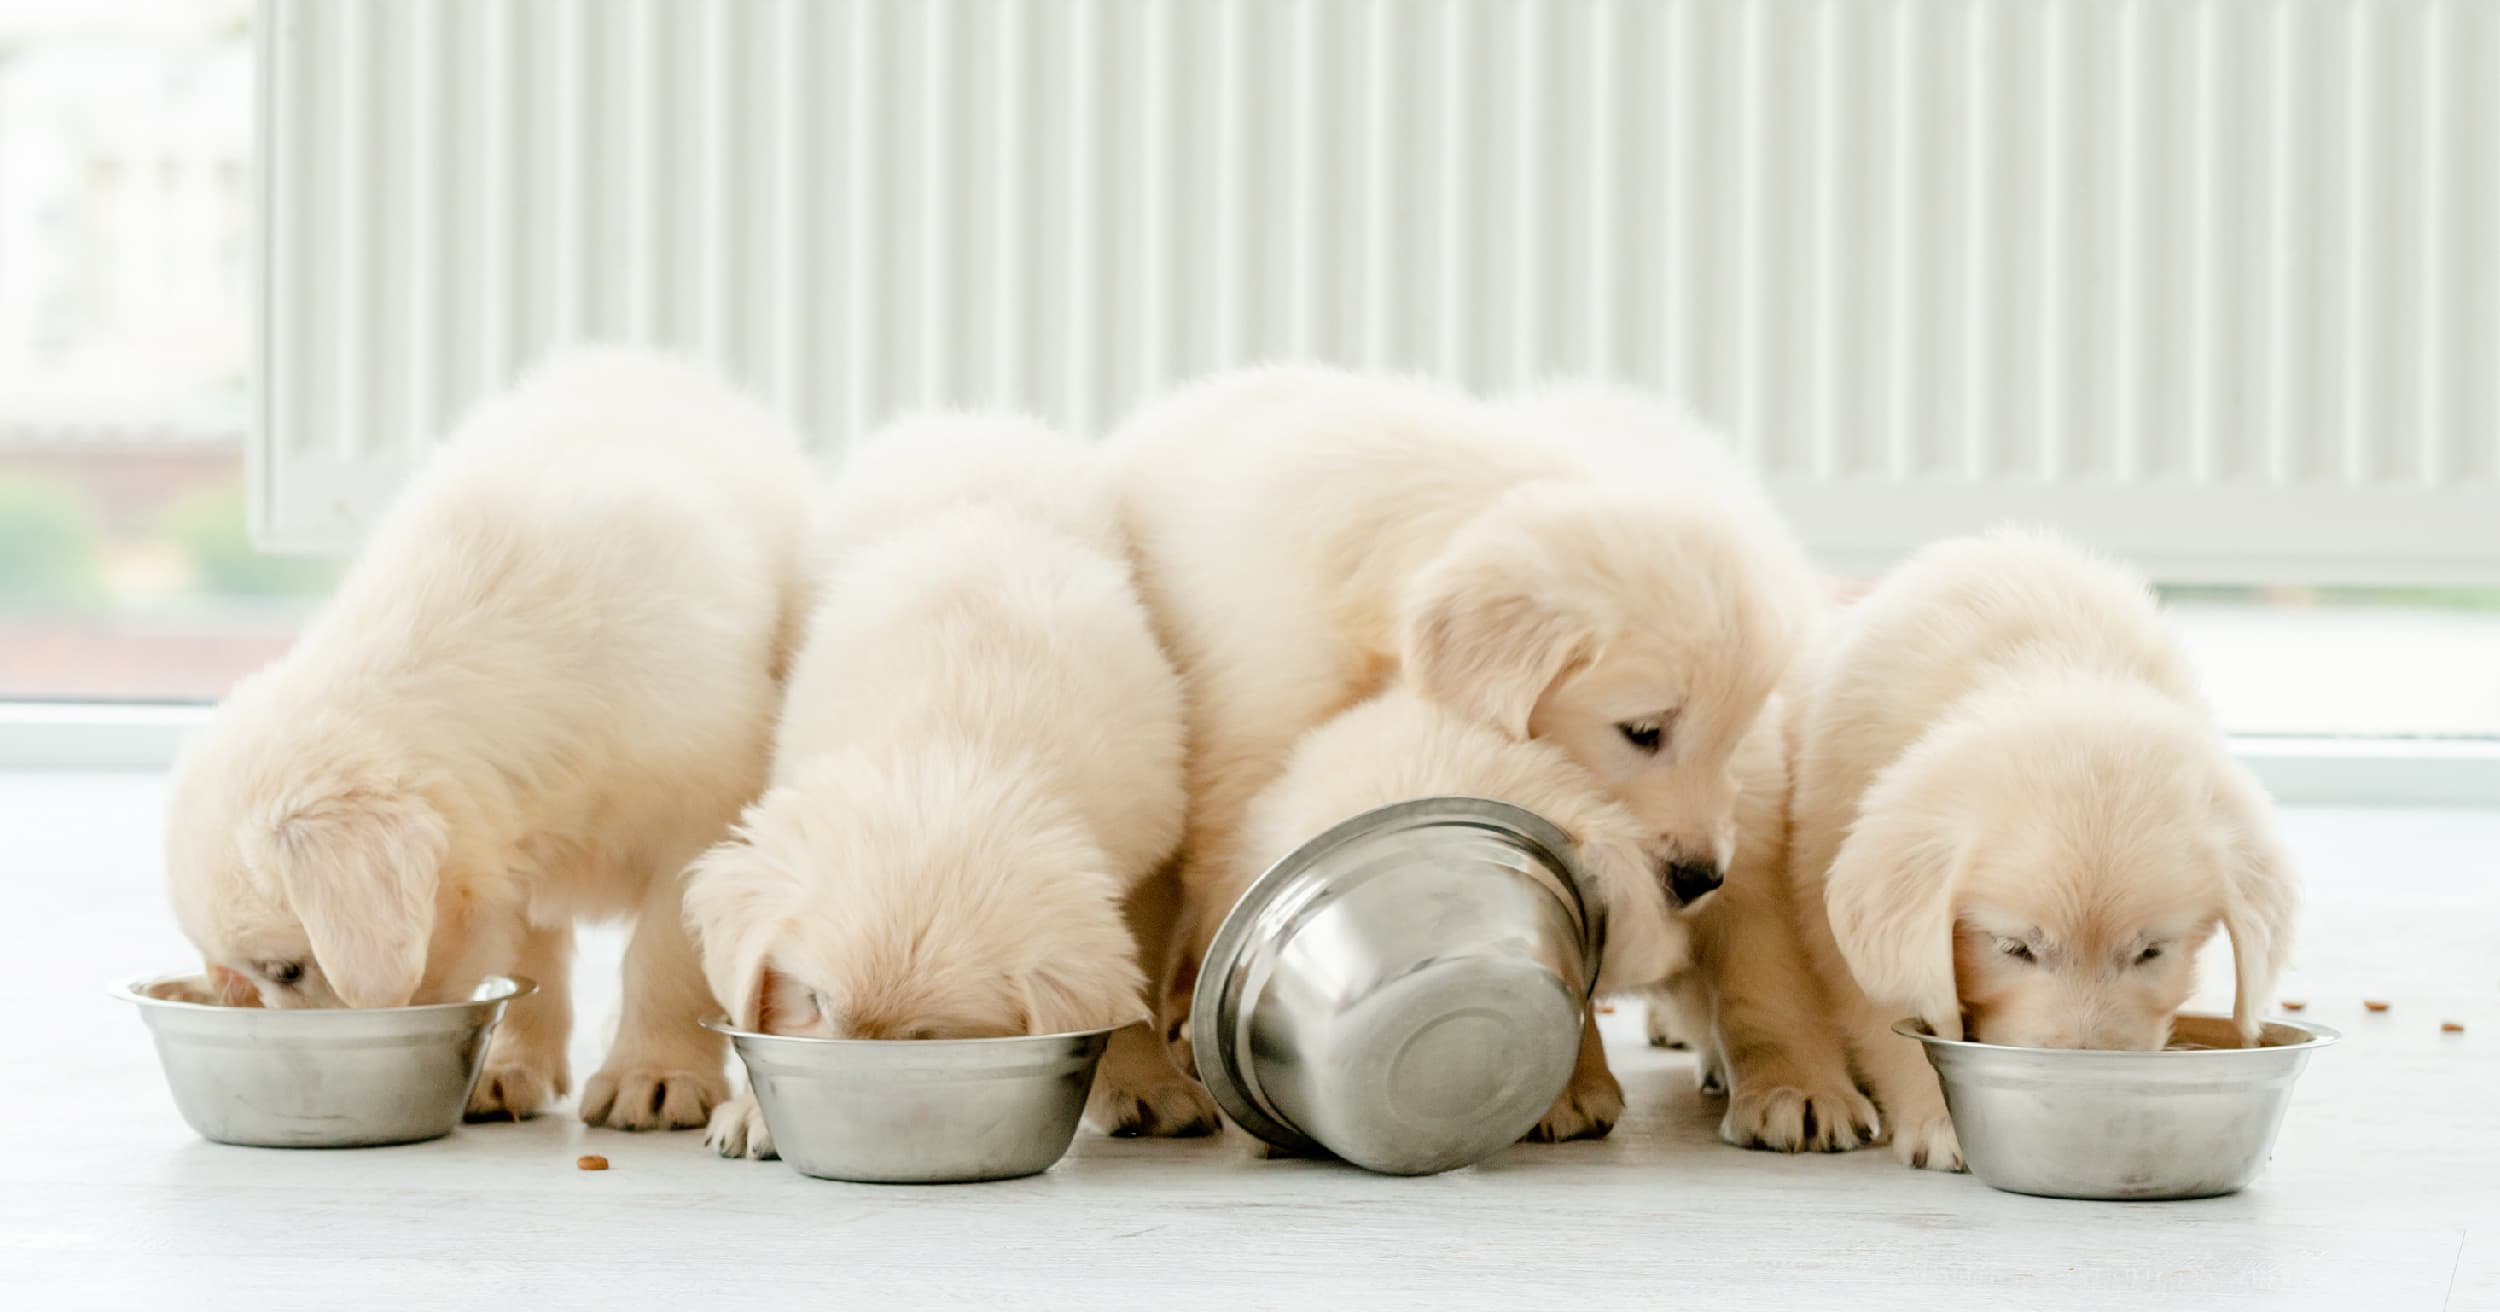 A group of puppies eating food from metal bowls on the floor.